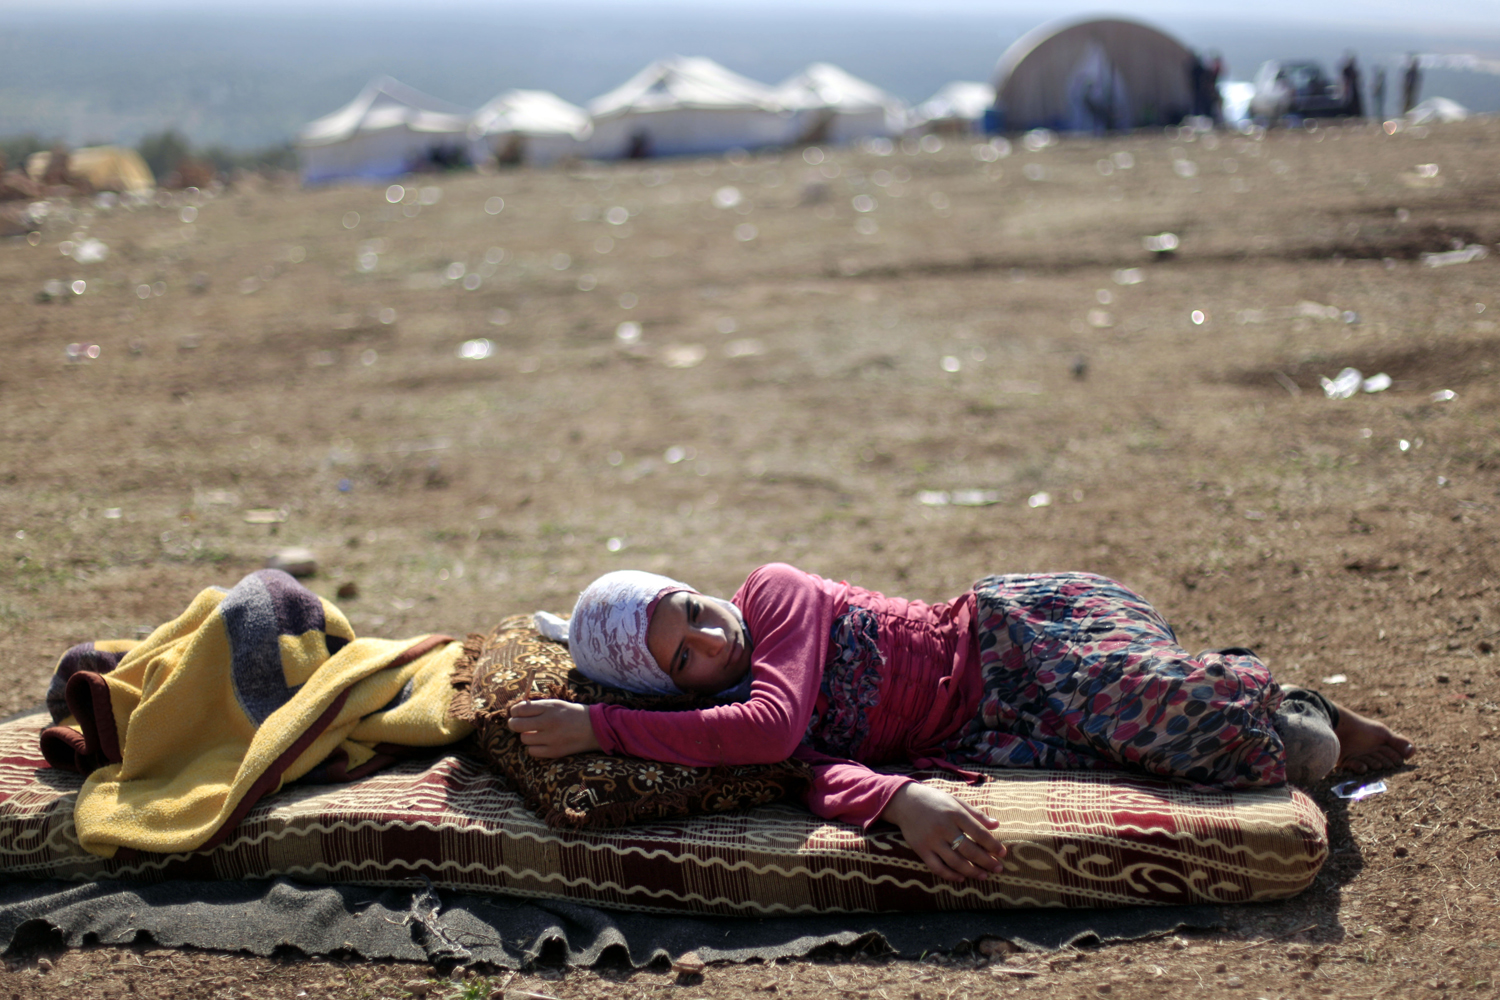 Image: Nov. 5, 2012. A Syrian girl who fled with her family from the violence in their village, rests at a displaced camp, in the Syrian village of Atma, near the Turkish border.